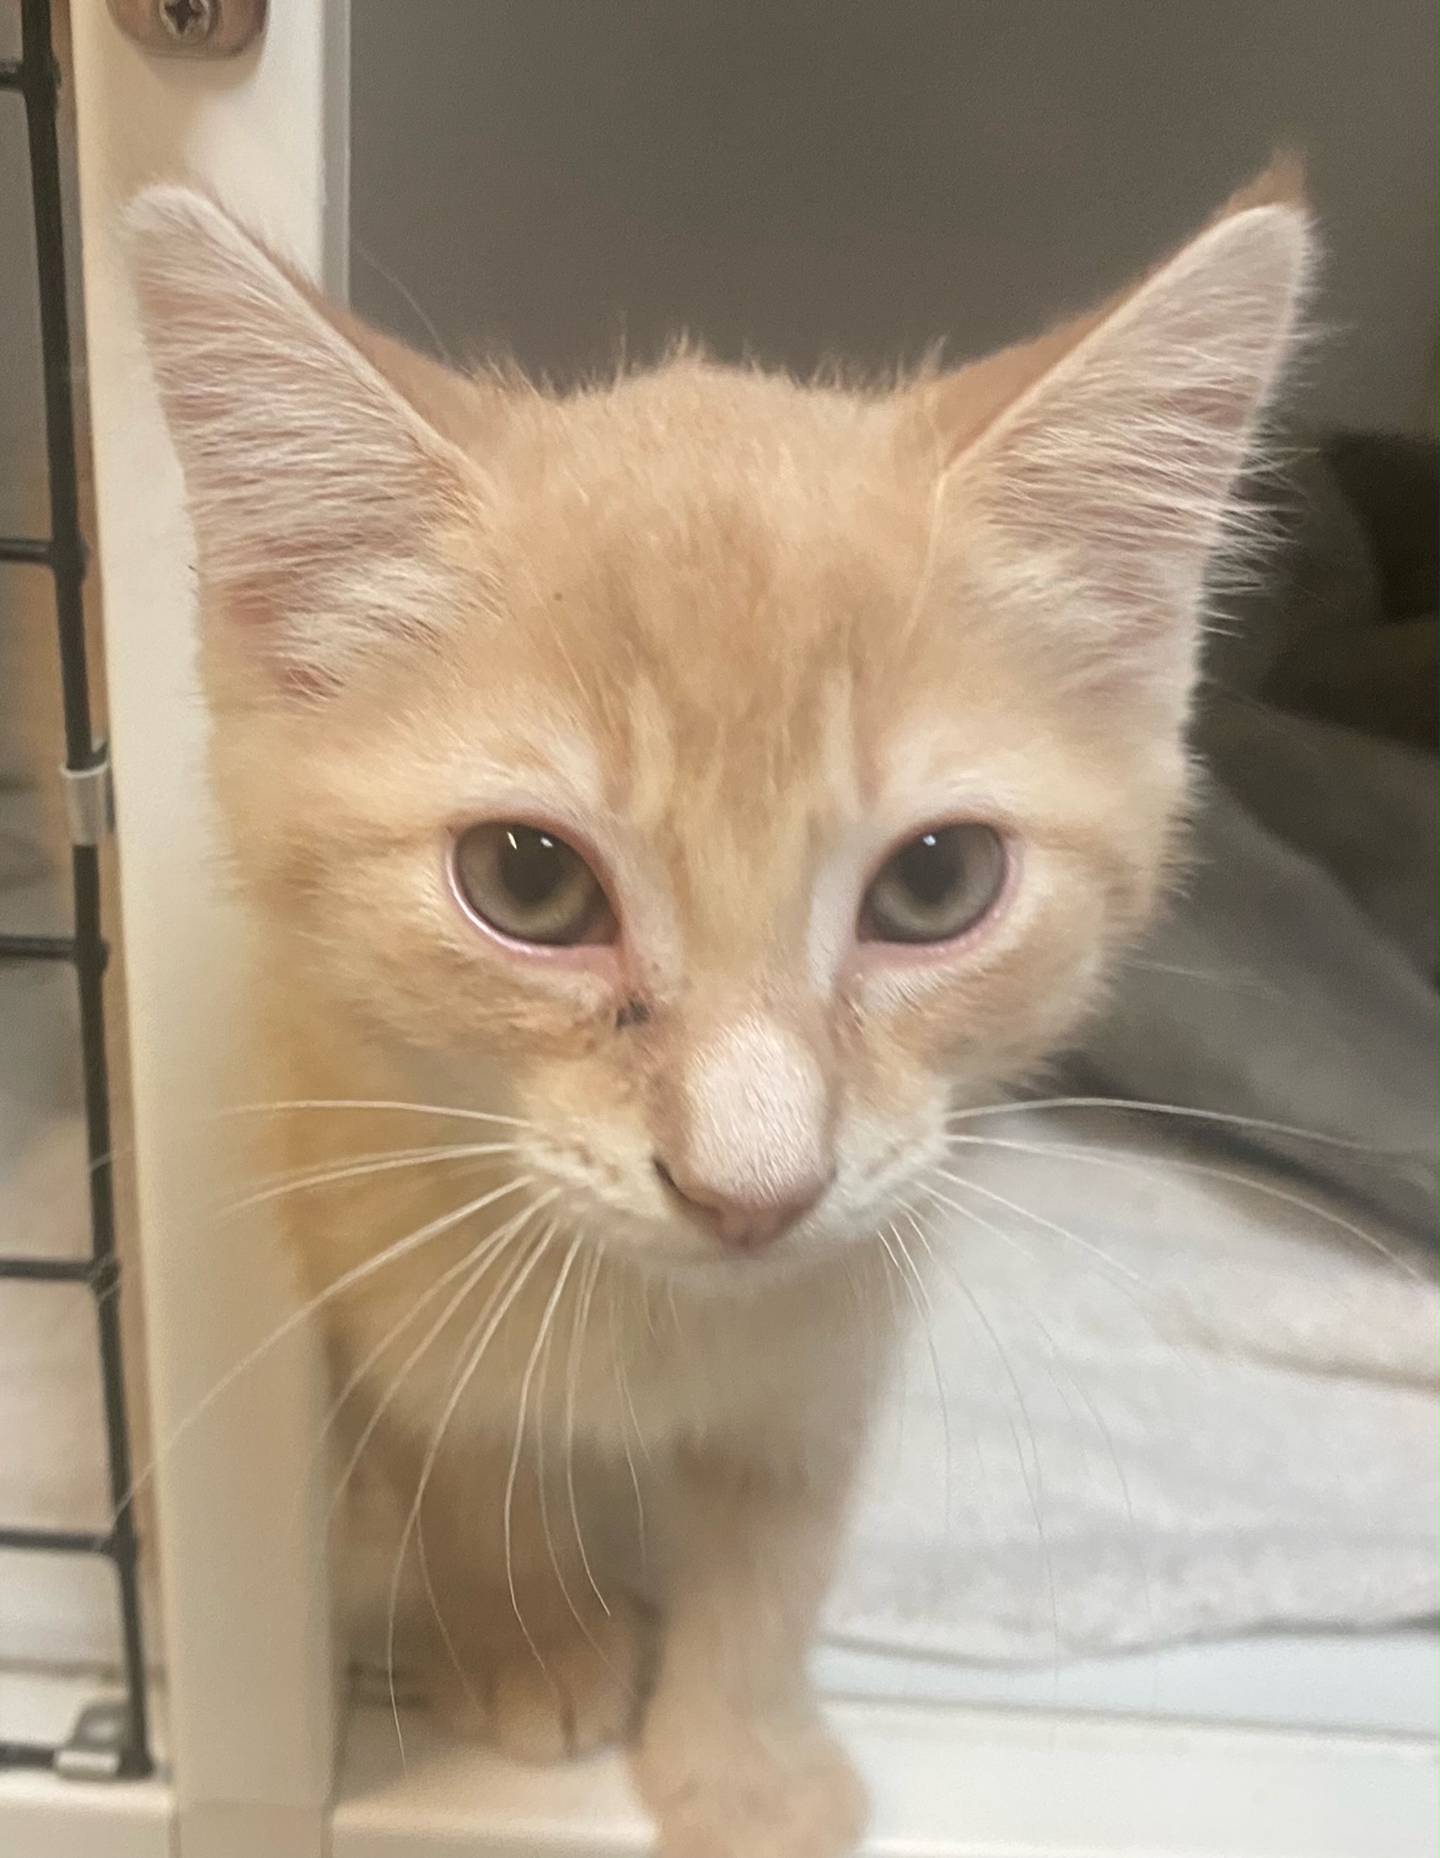 Nougat is a 3-month-old domestic shorthair. He is very outgoing and curious. Nougat is shy at first but, will come around on his own time. For more information on Nougat, including adoption fees please visit justanimals.org or call 815-448-2510.